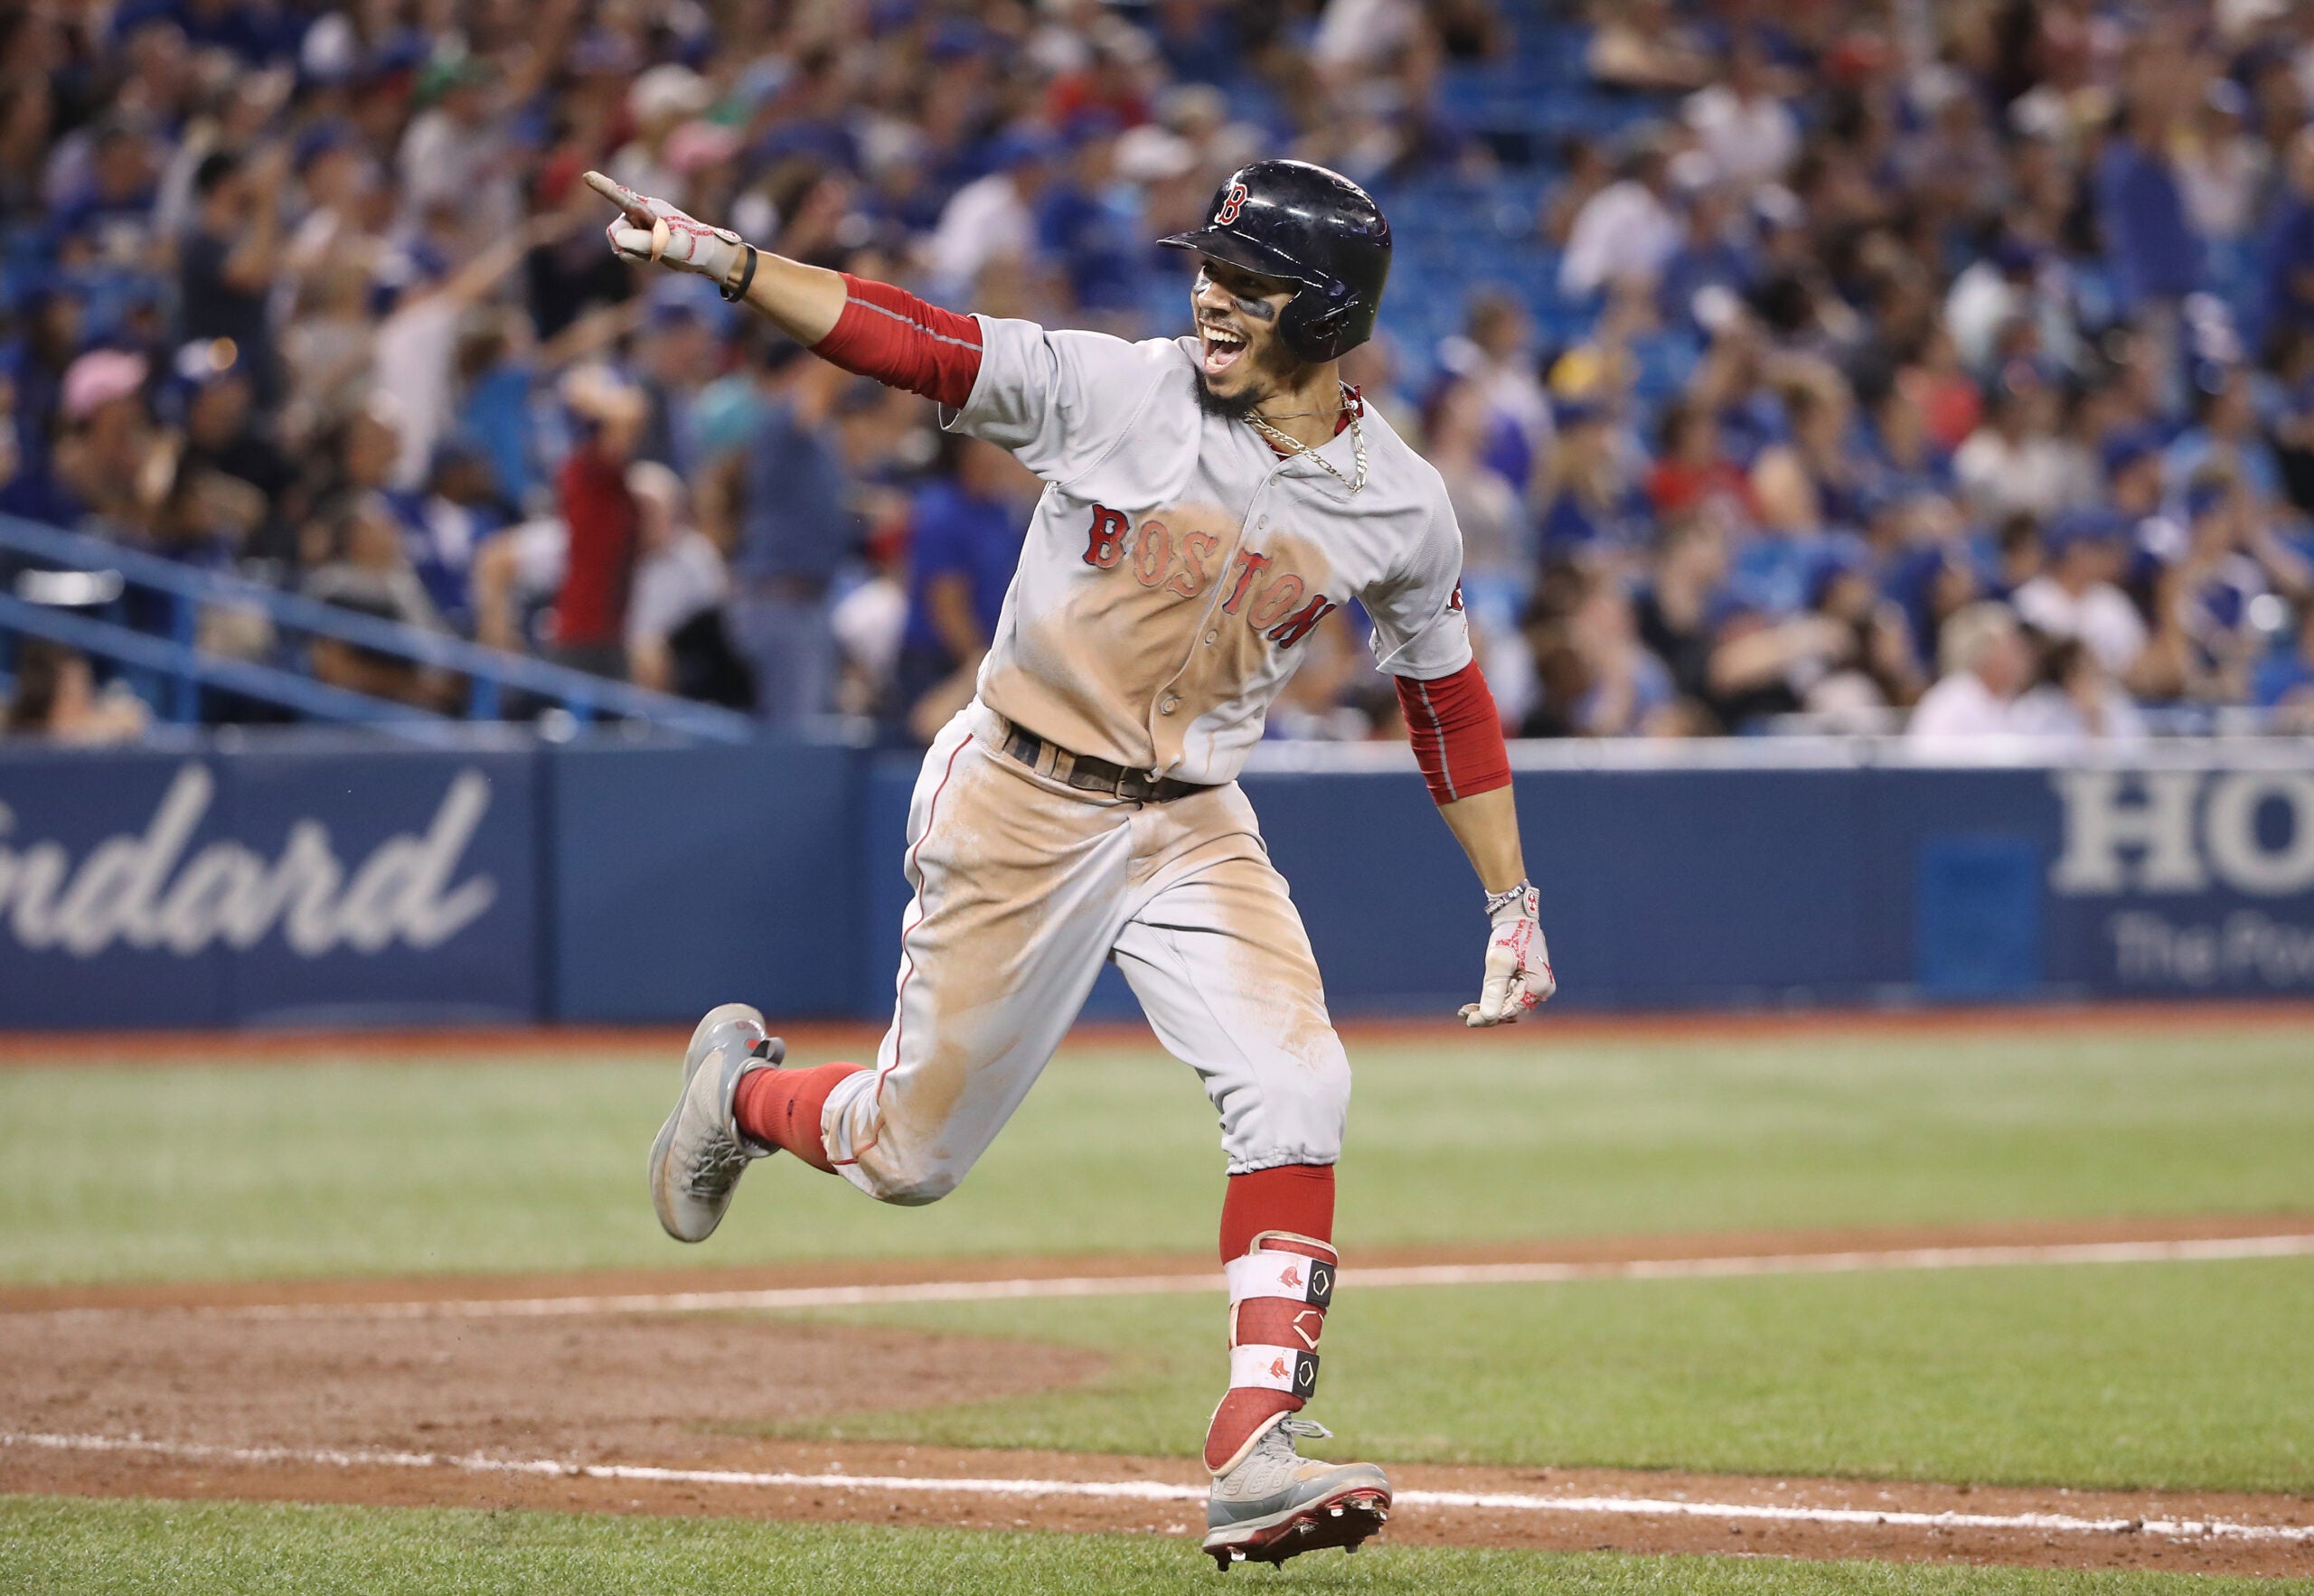 Mookie Betts to play right field in Toronto